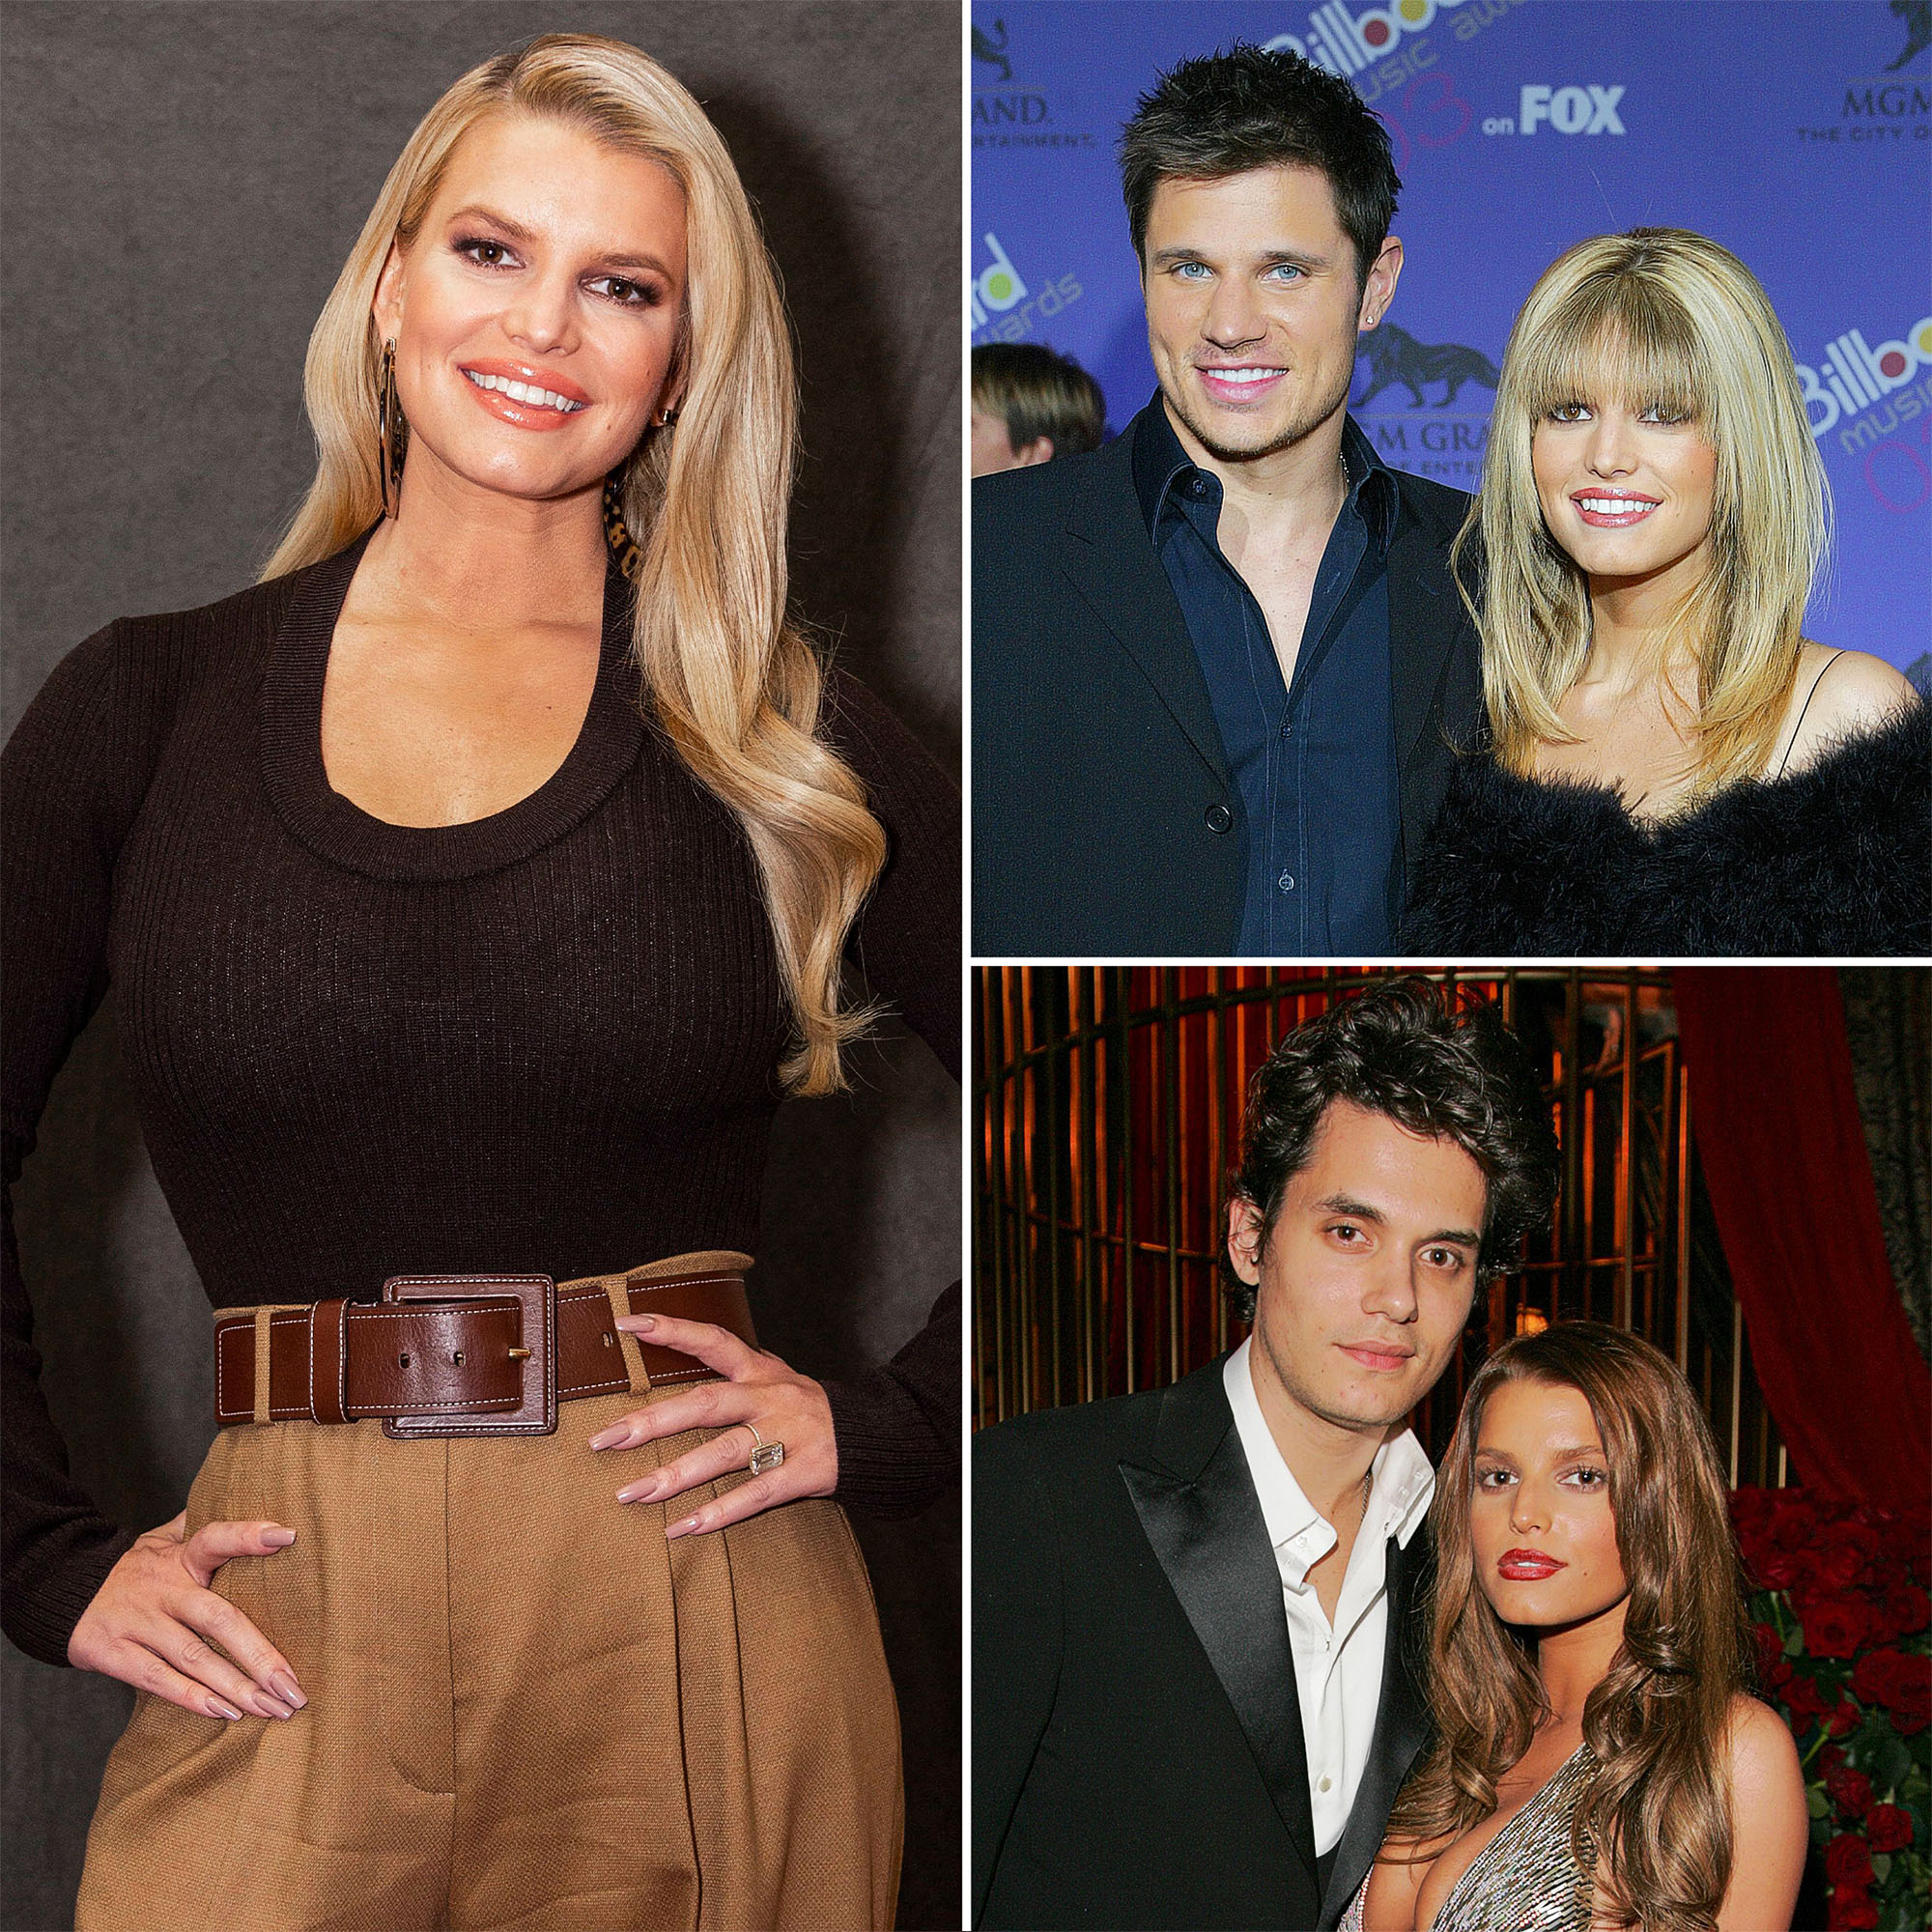 Jessica Simpson and Nick Lachey are engaged